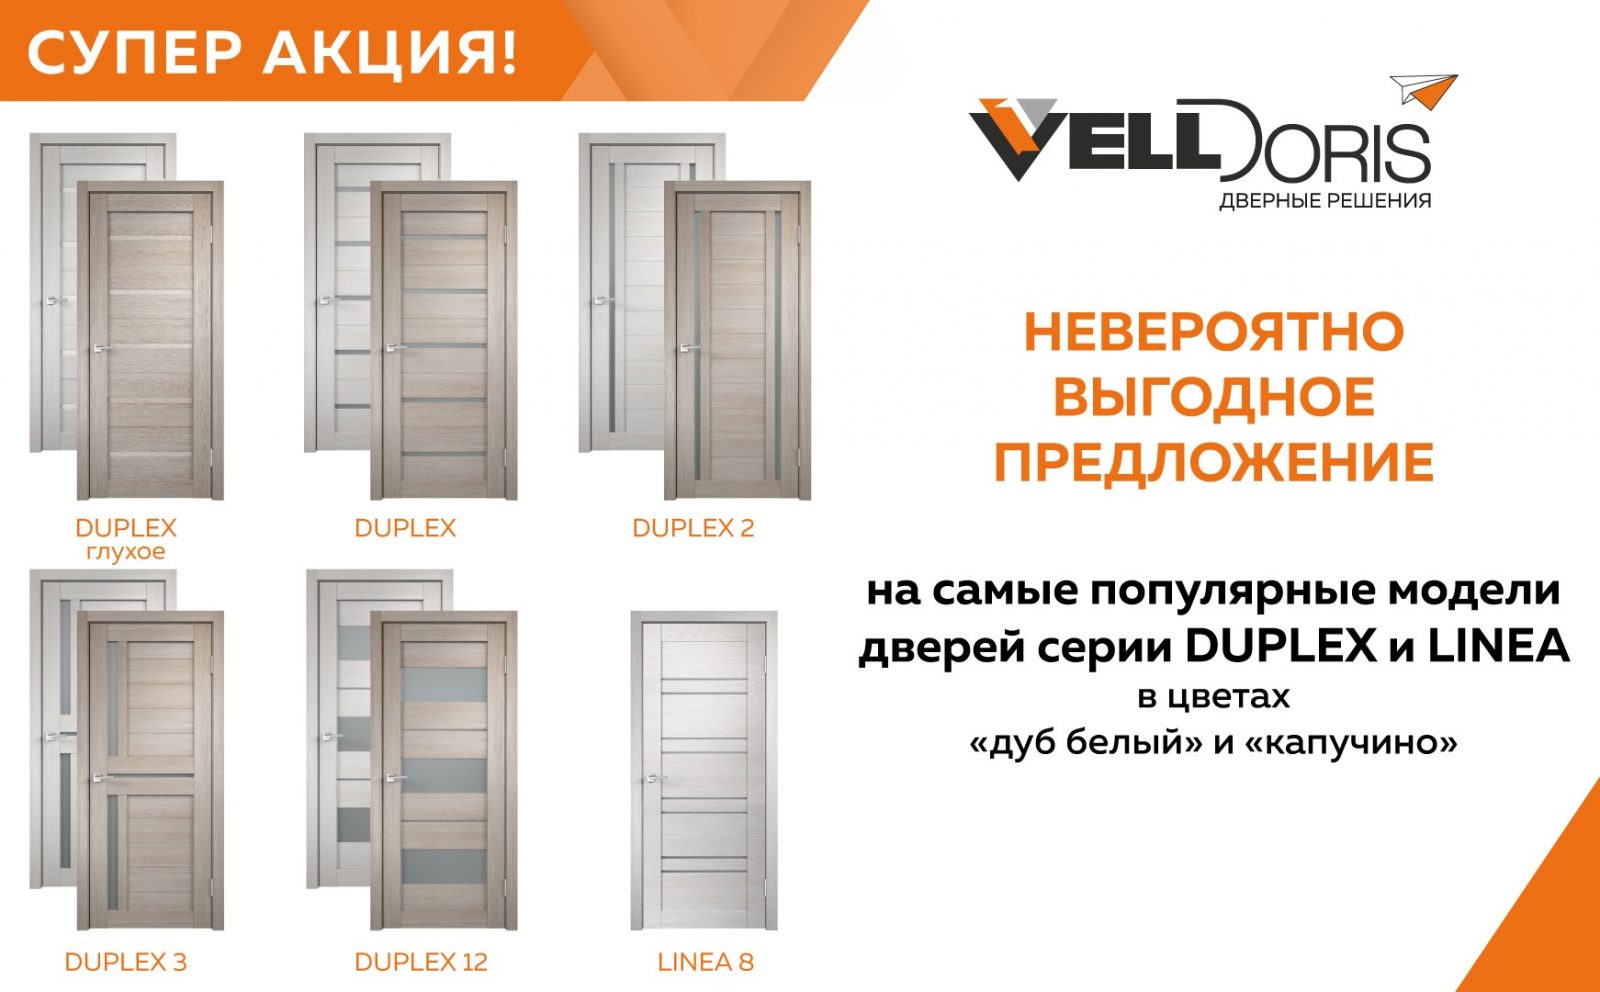 You are currently viewing Акция Duplex Velldoris